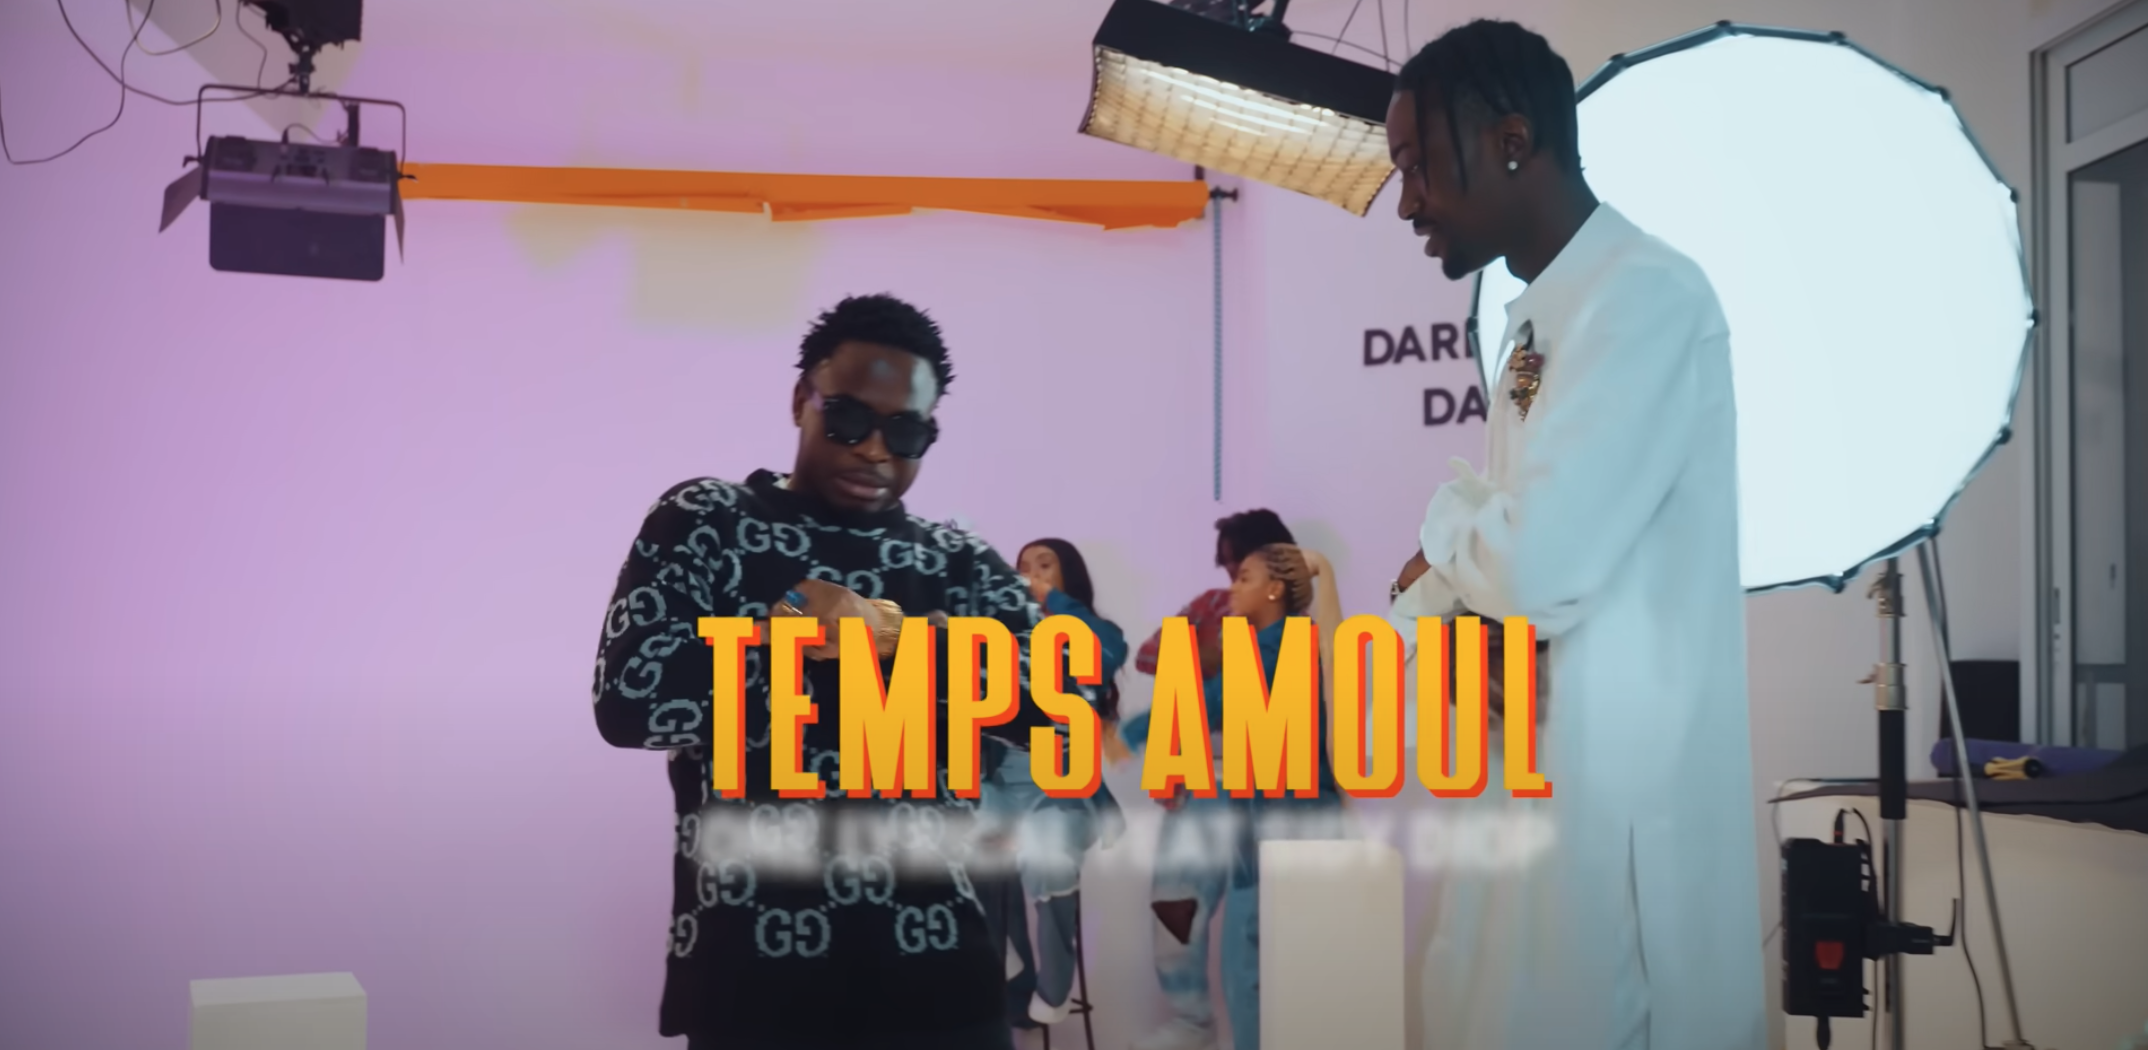 ONE LYRICAL - Temps Amoul Feat Sidy Diop (clip officiel)